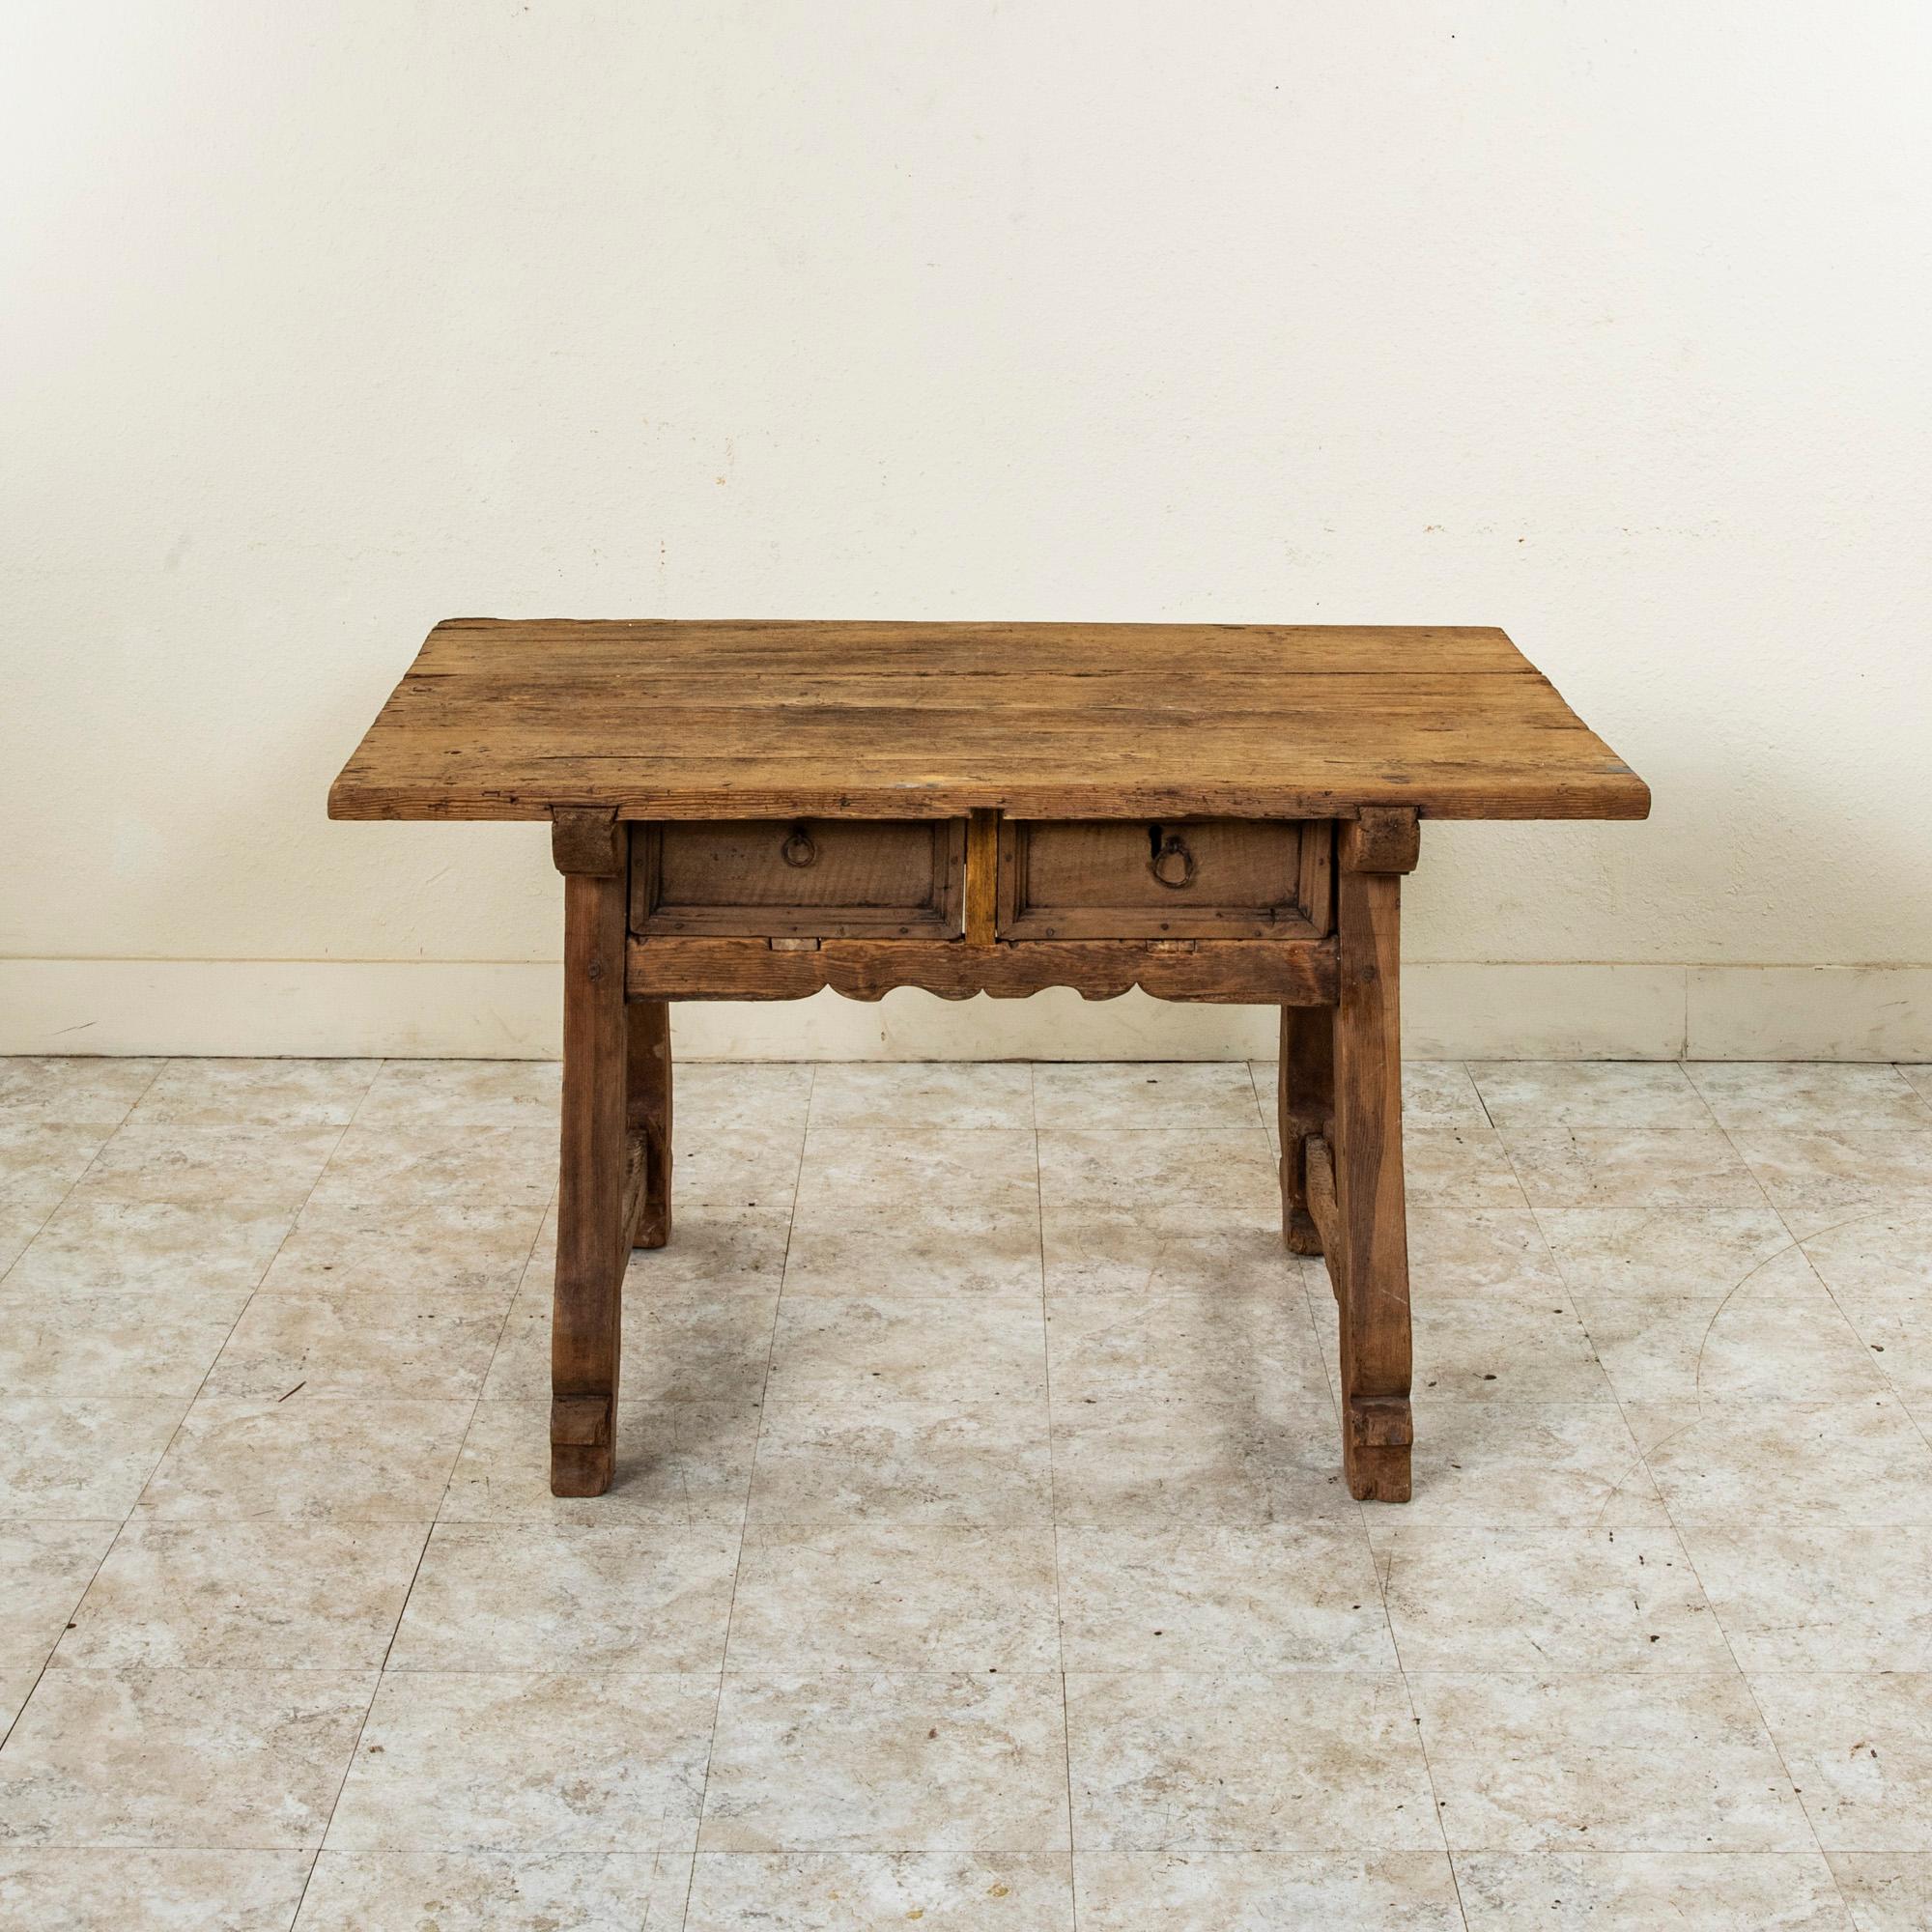 This rustic artisan made pine writing table hails from the Auvergne region, a mountainous area in central France. Created by a goat herder in the seventeenth century while tending his sheep, this table is constructed of hand pegged mortise and tenon